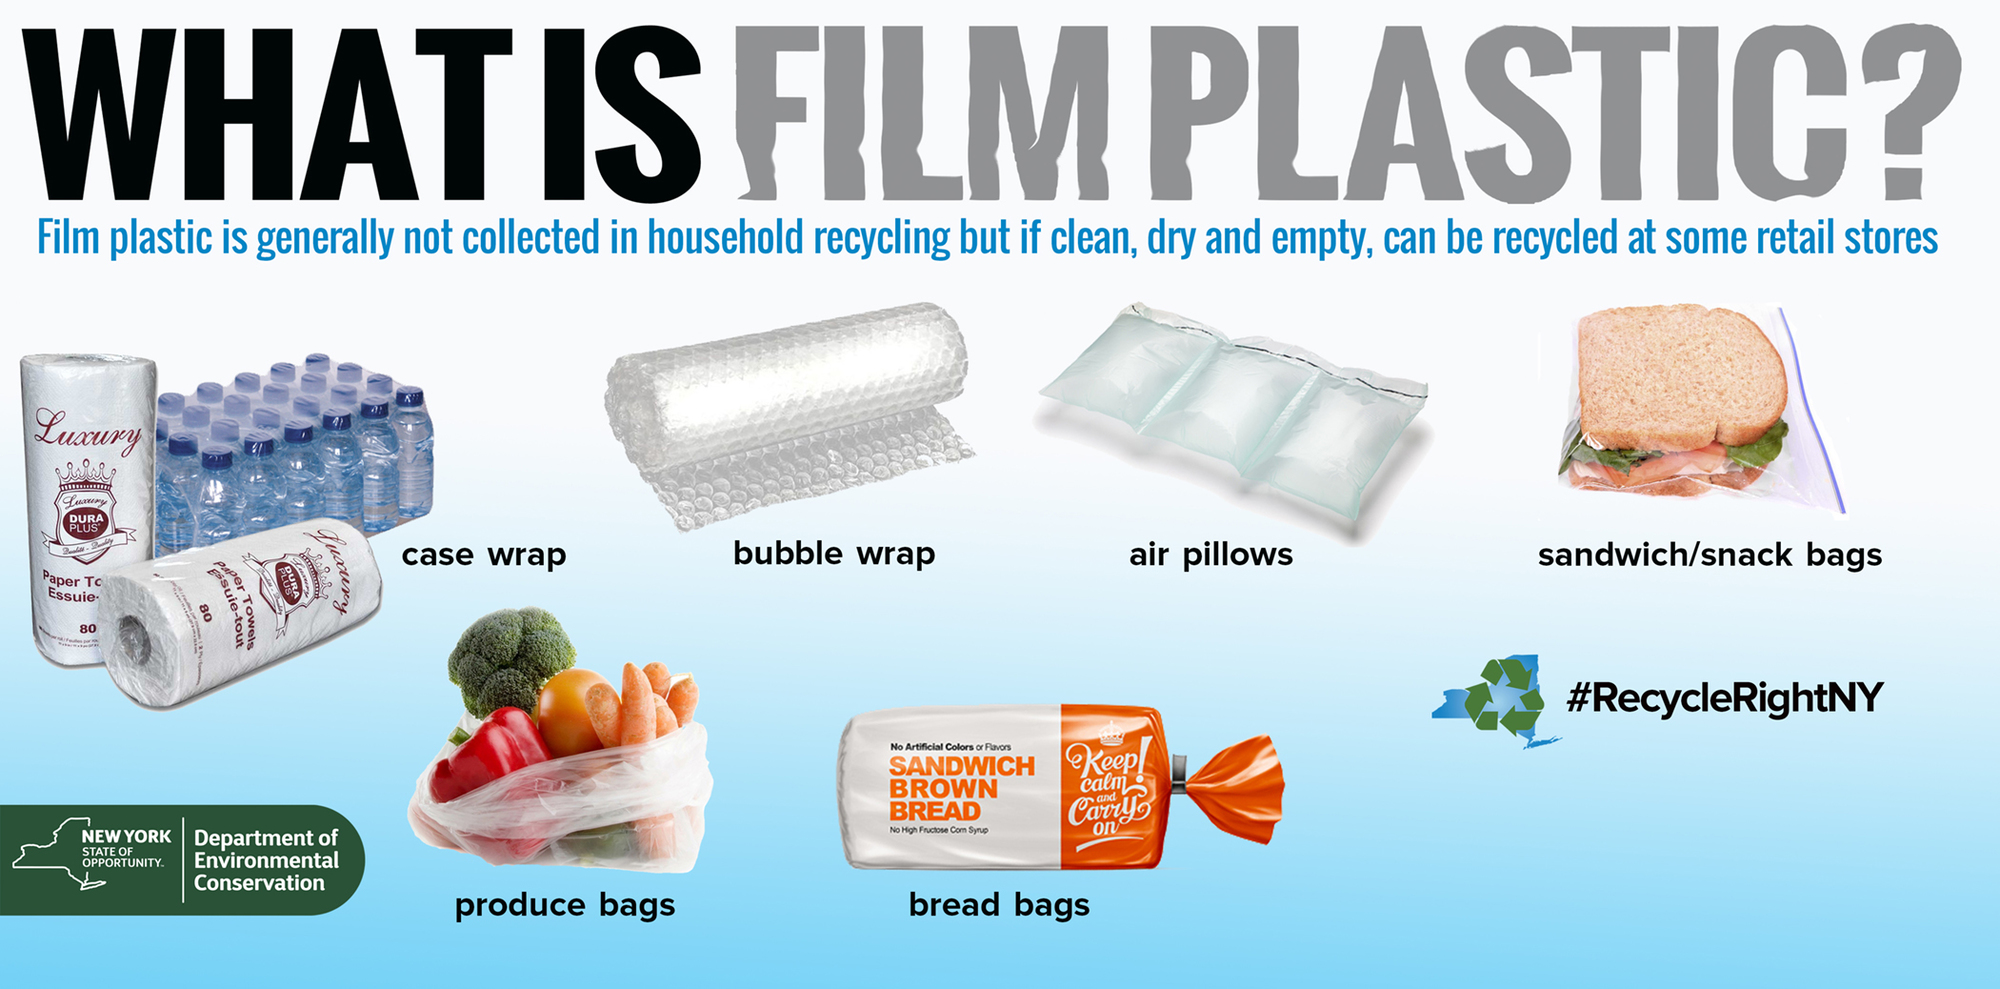 Image showing the different types of film plastic that can be recycled at return to retail locations